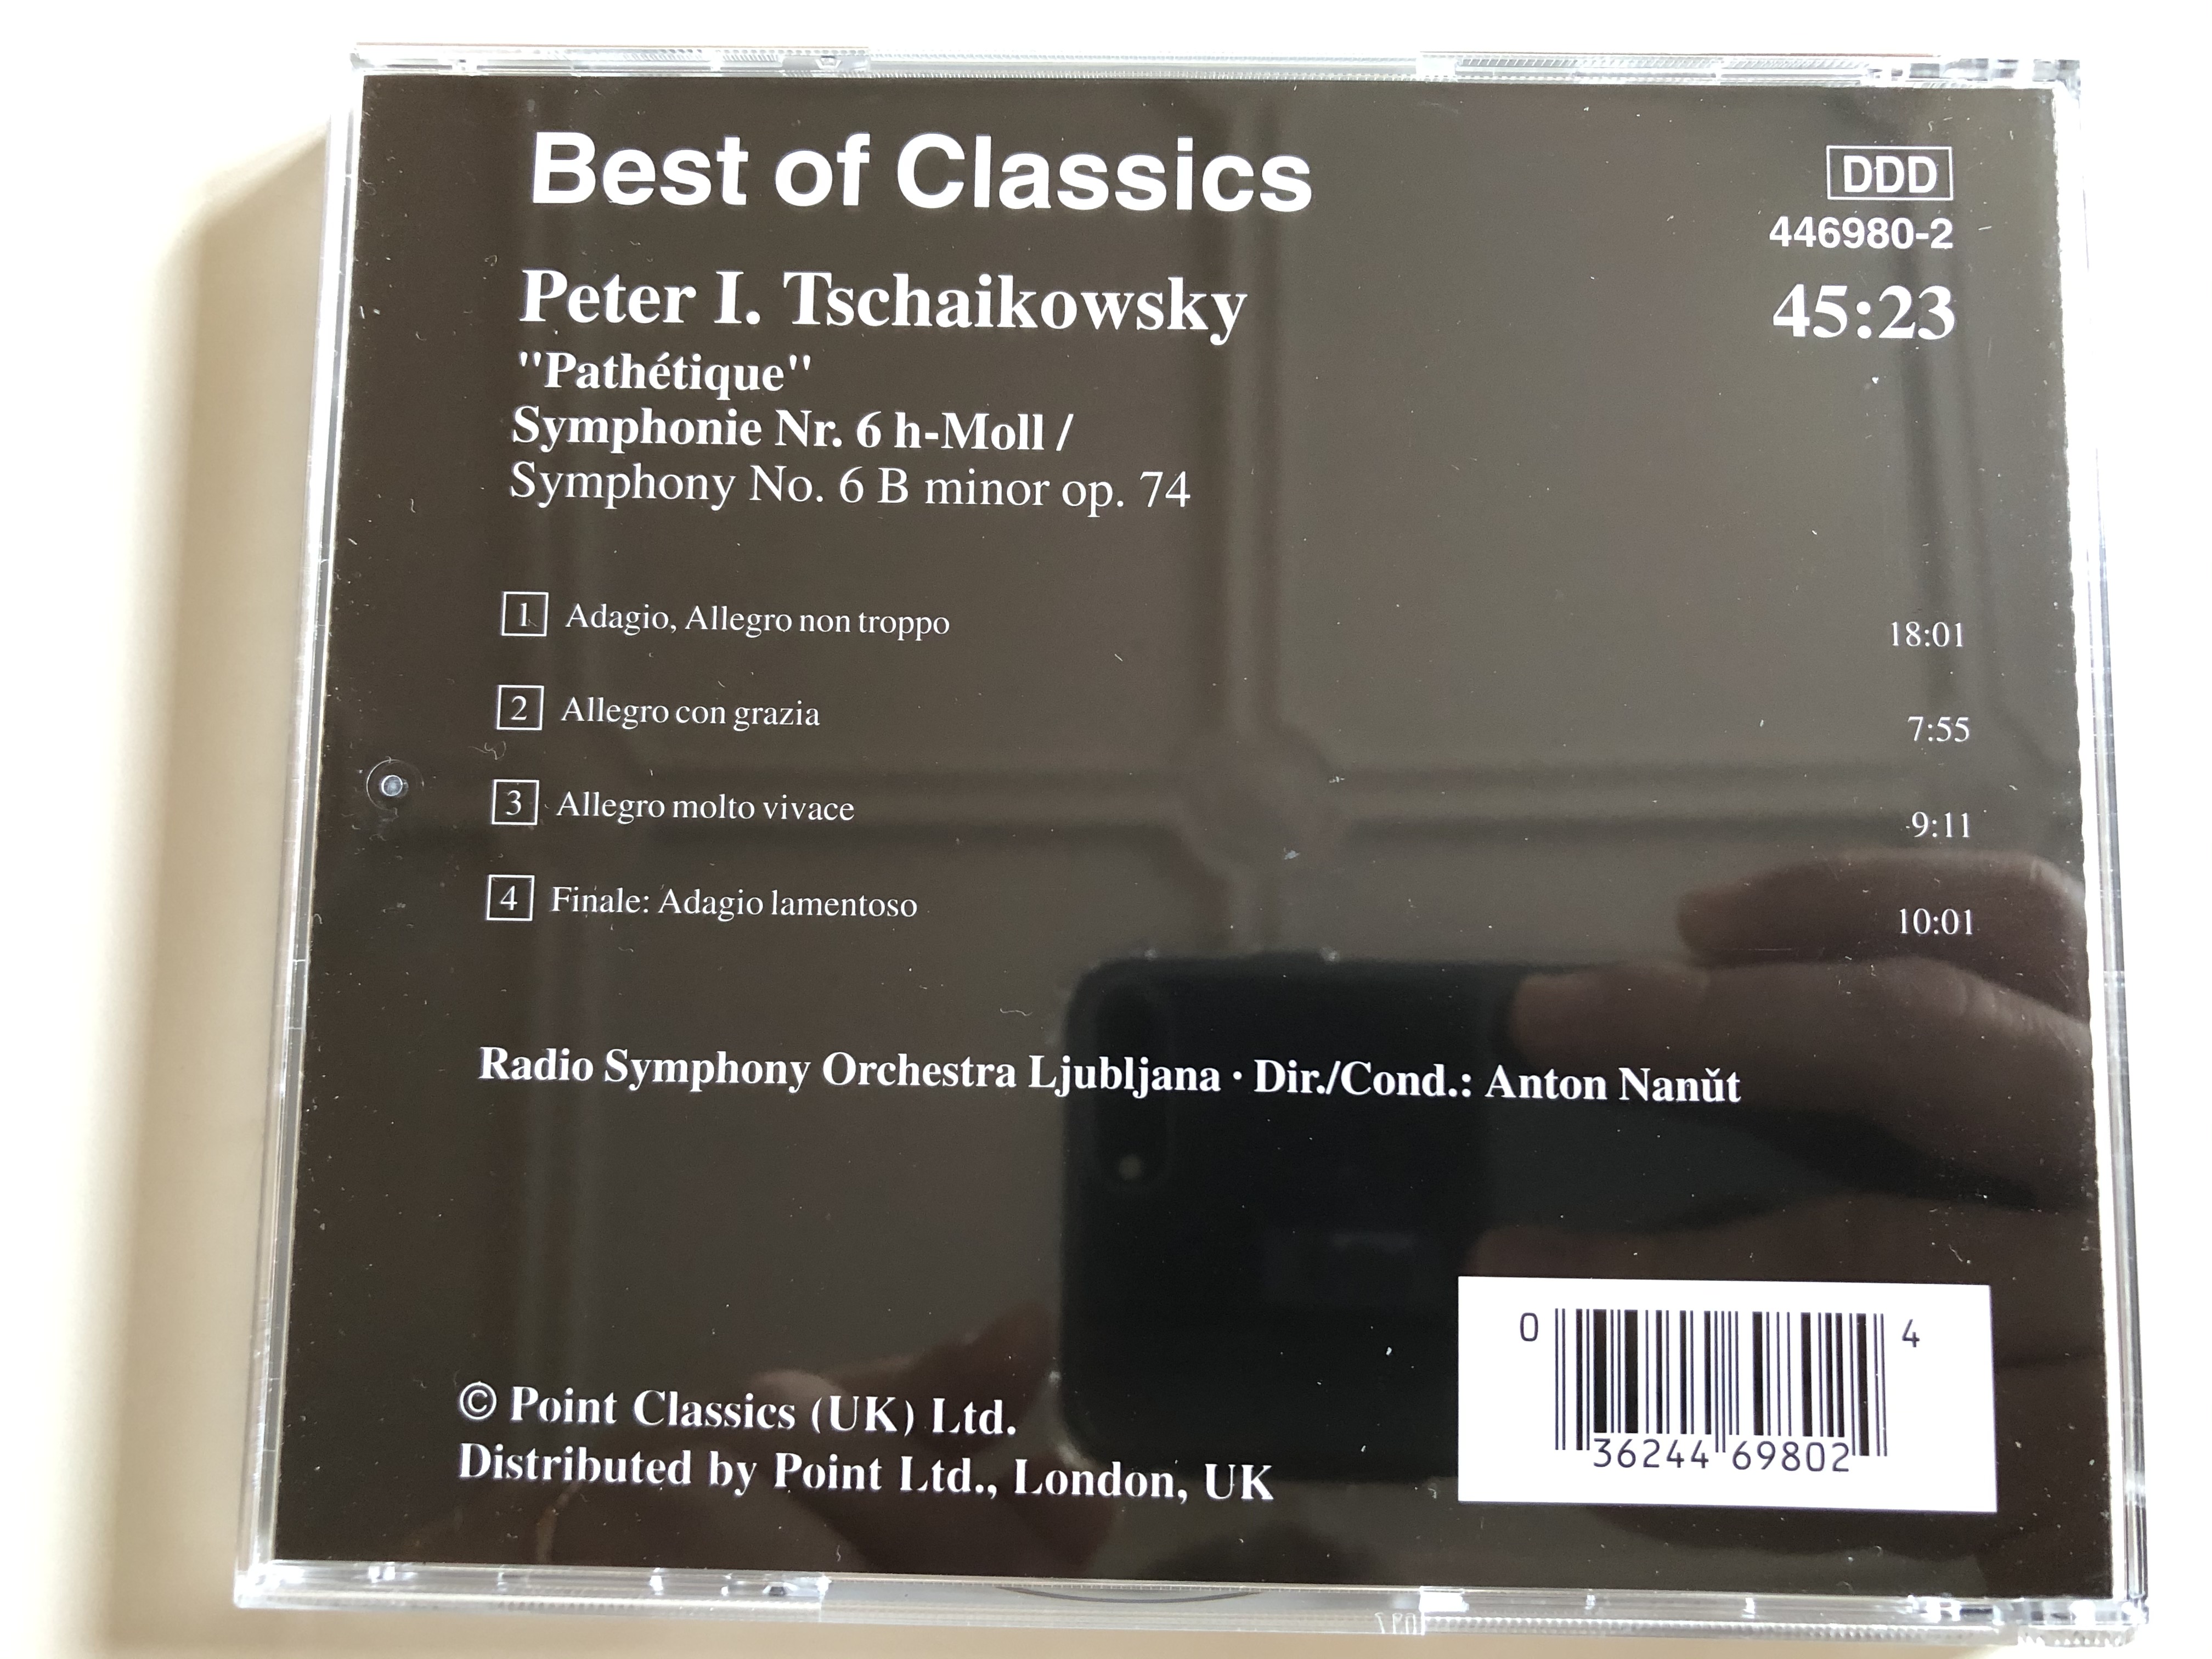 peter-i.-tchaikowsky-symphonie-nr-6-path-tique-best-of-classics-point-classics-audio-cd-stereo-446980-2-3-.jpg